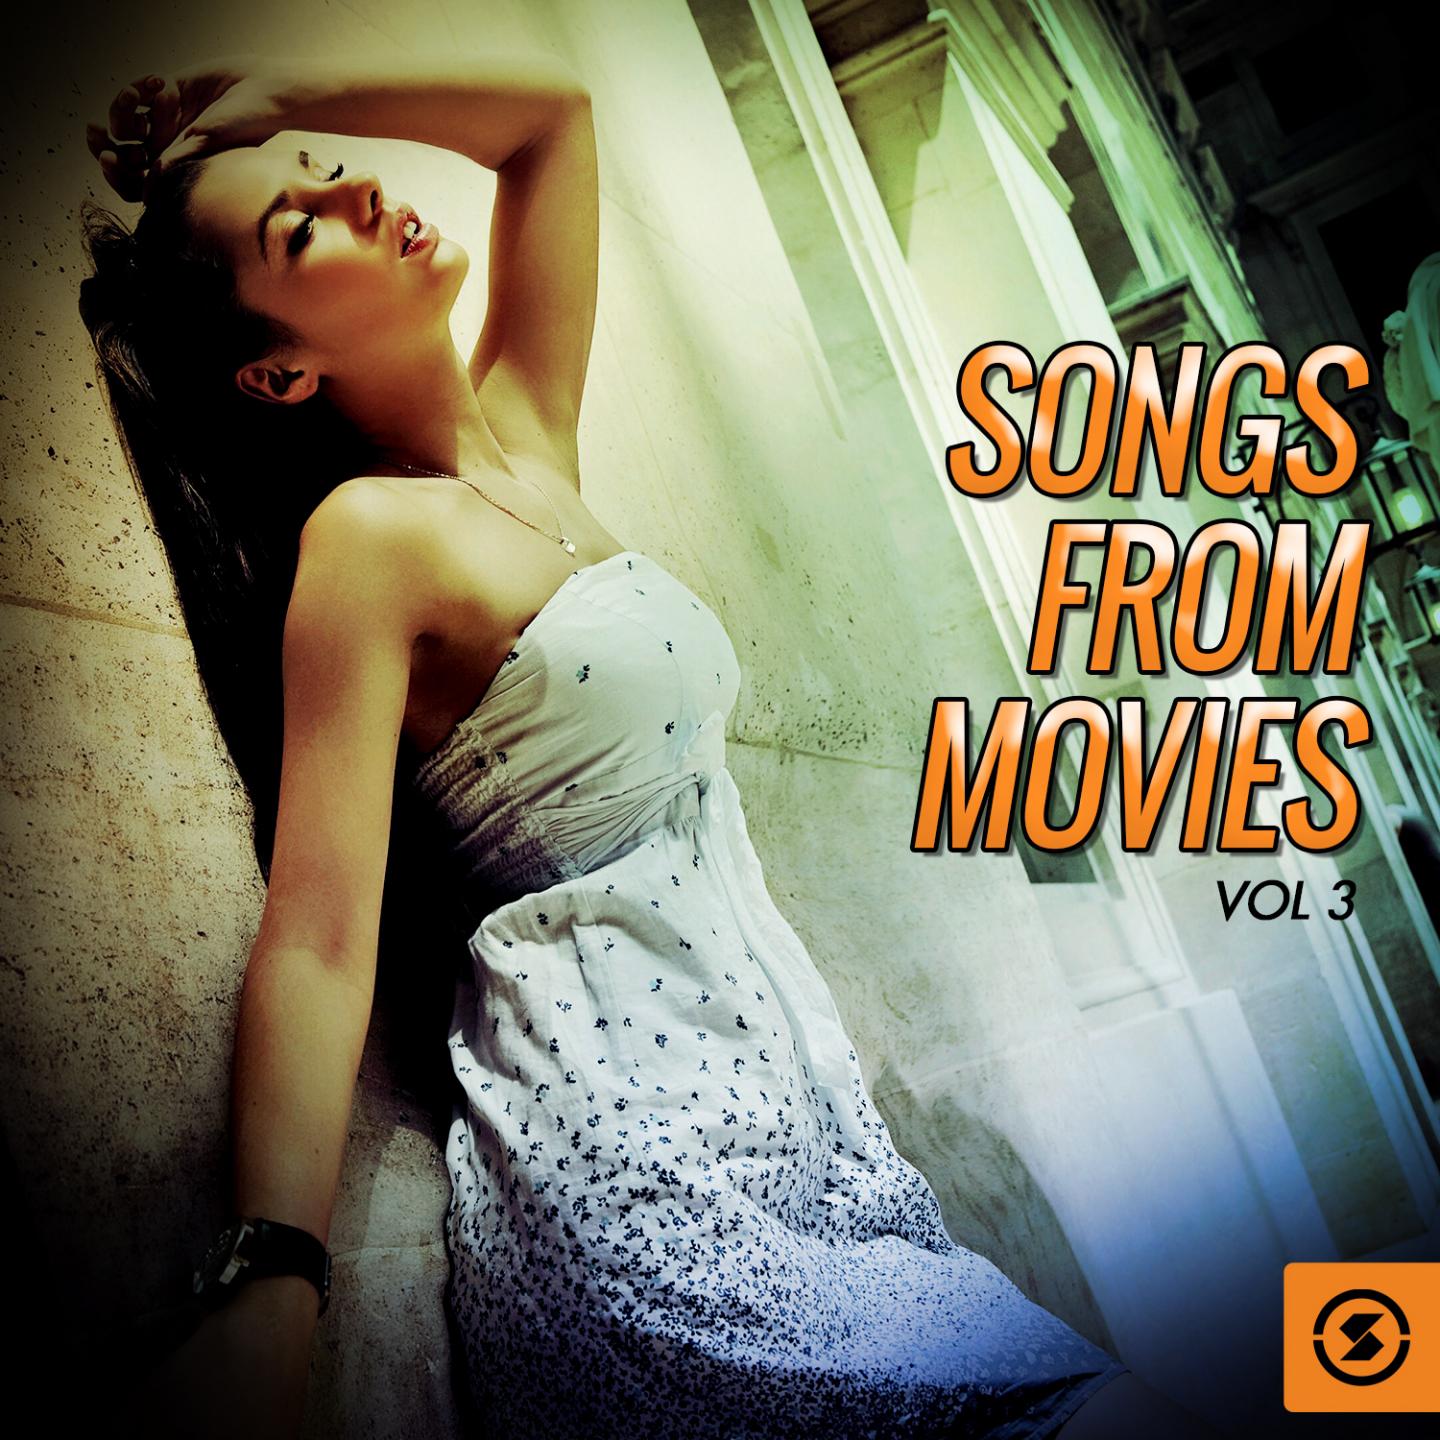 Songs from Movies, Vol. 3